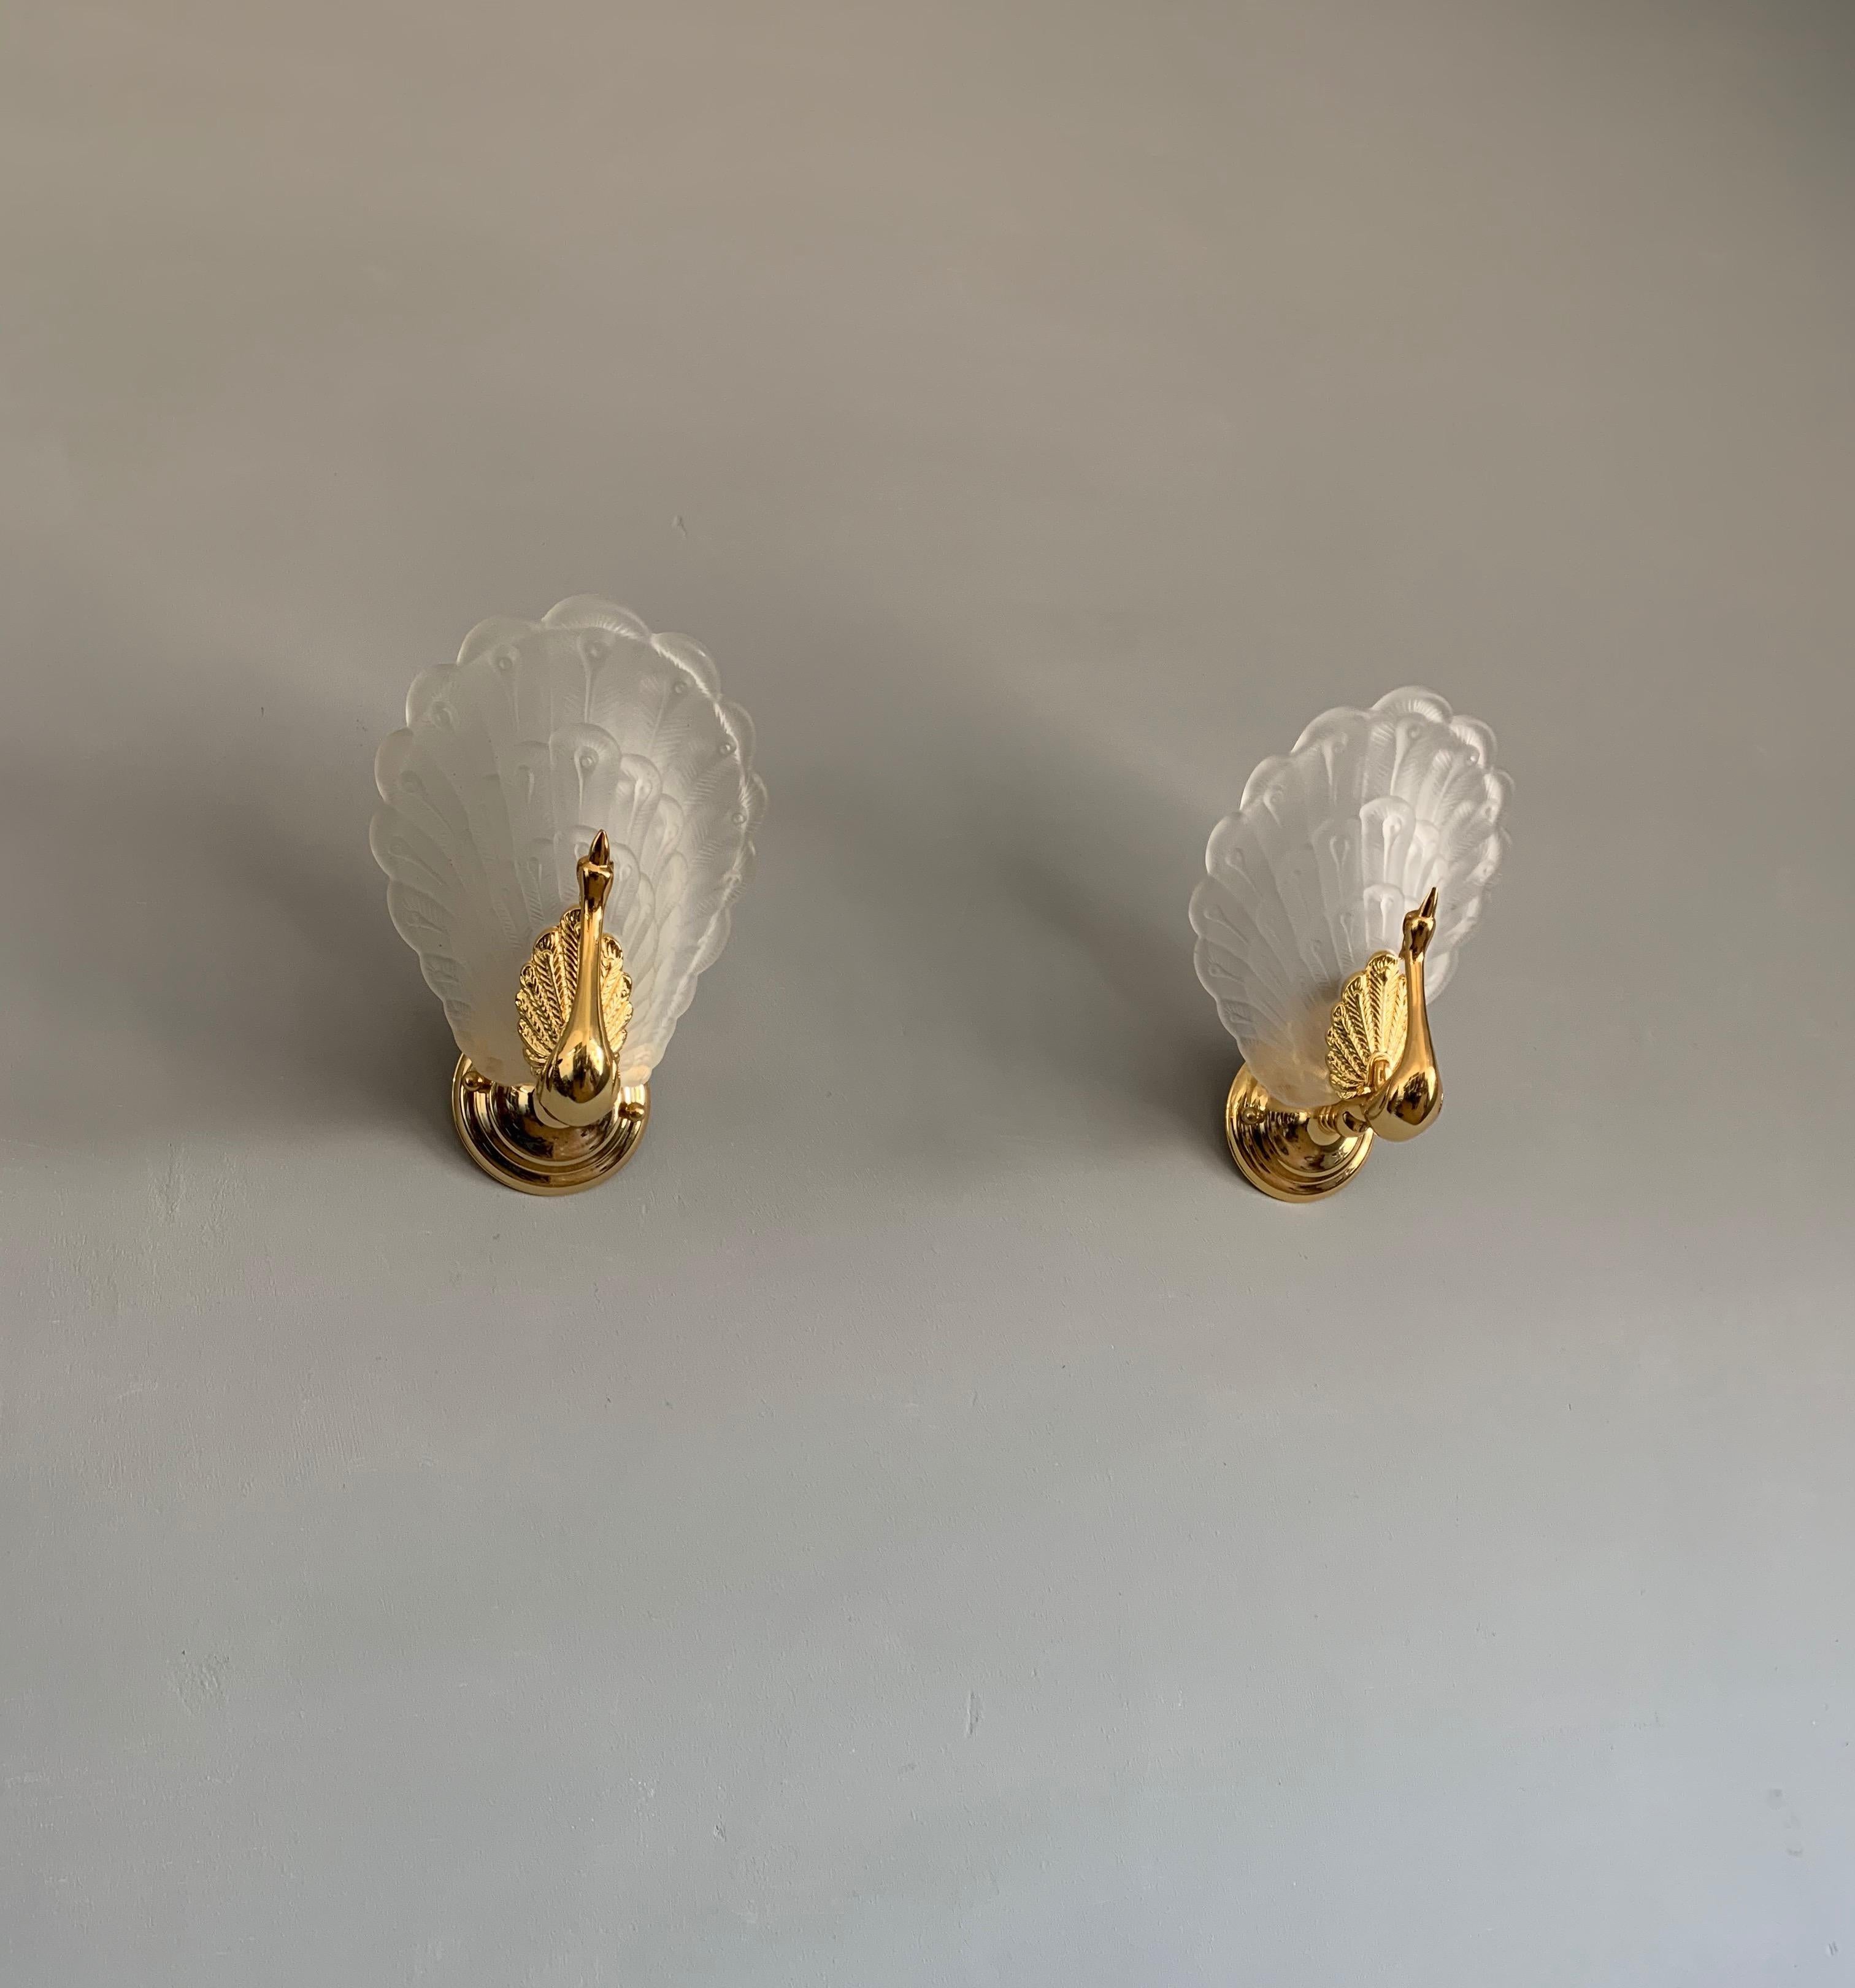 20th Century Midcentury Modern Pair of Wall Sconces w. Golden Bronze Glass Peacock Sculptures